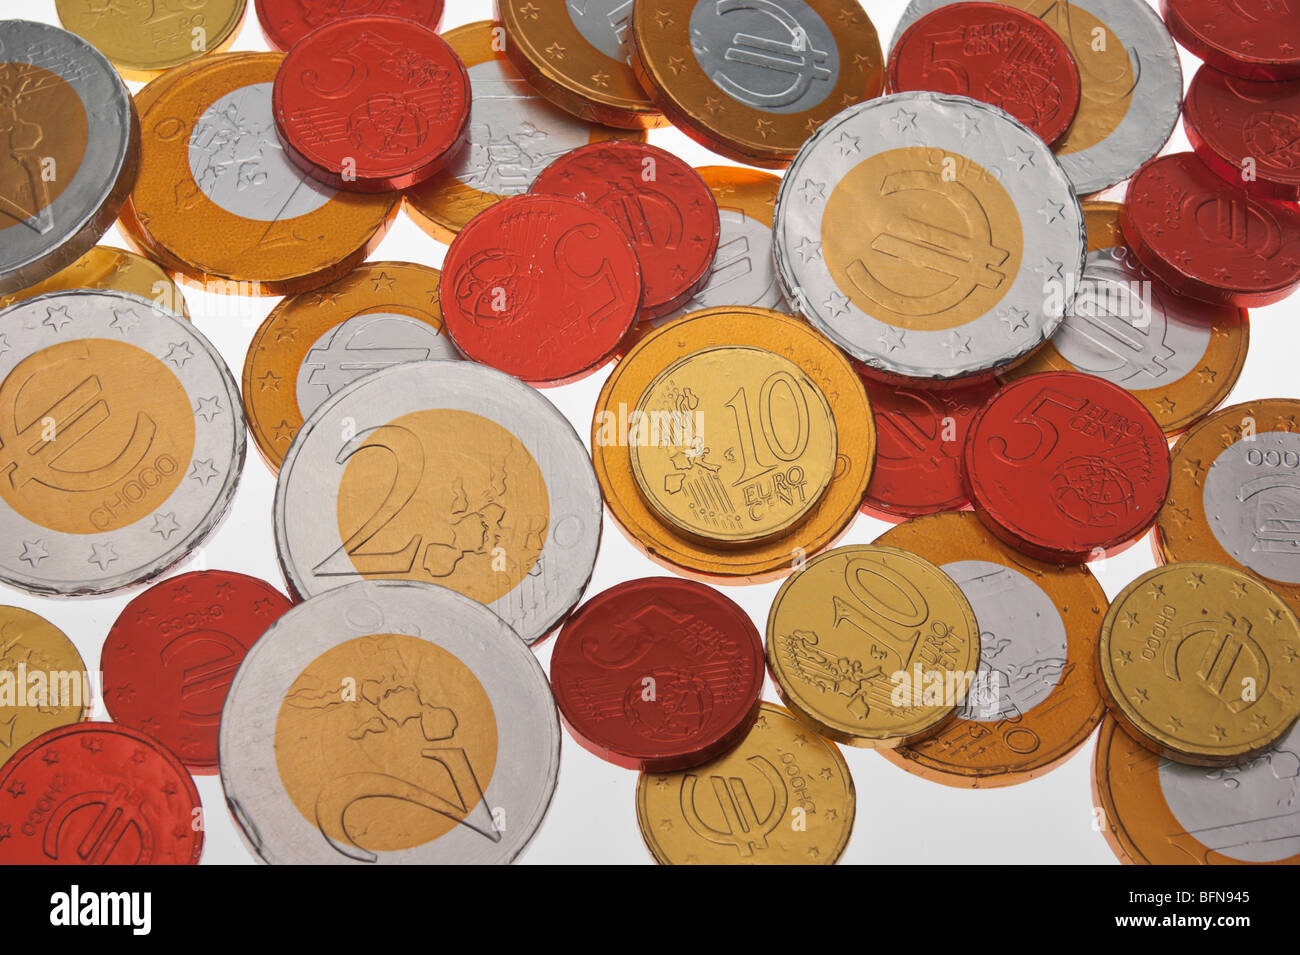 Chocolate coins for Christmas stockings - Euros instead of pounds and pennies Stock Photo